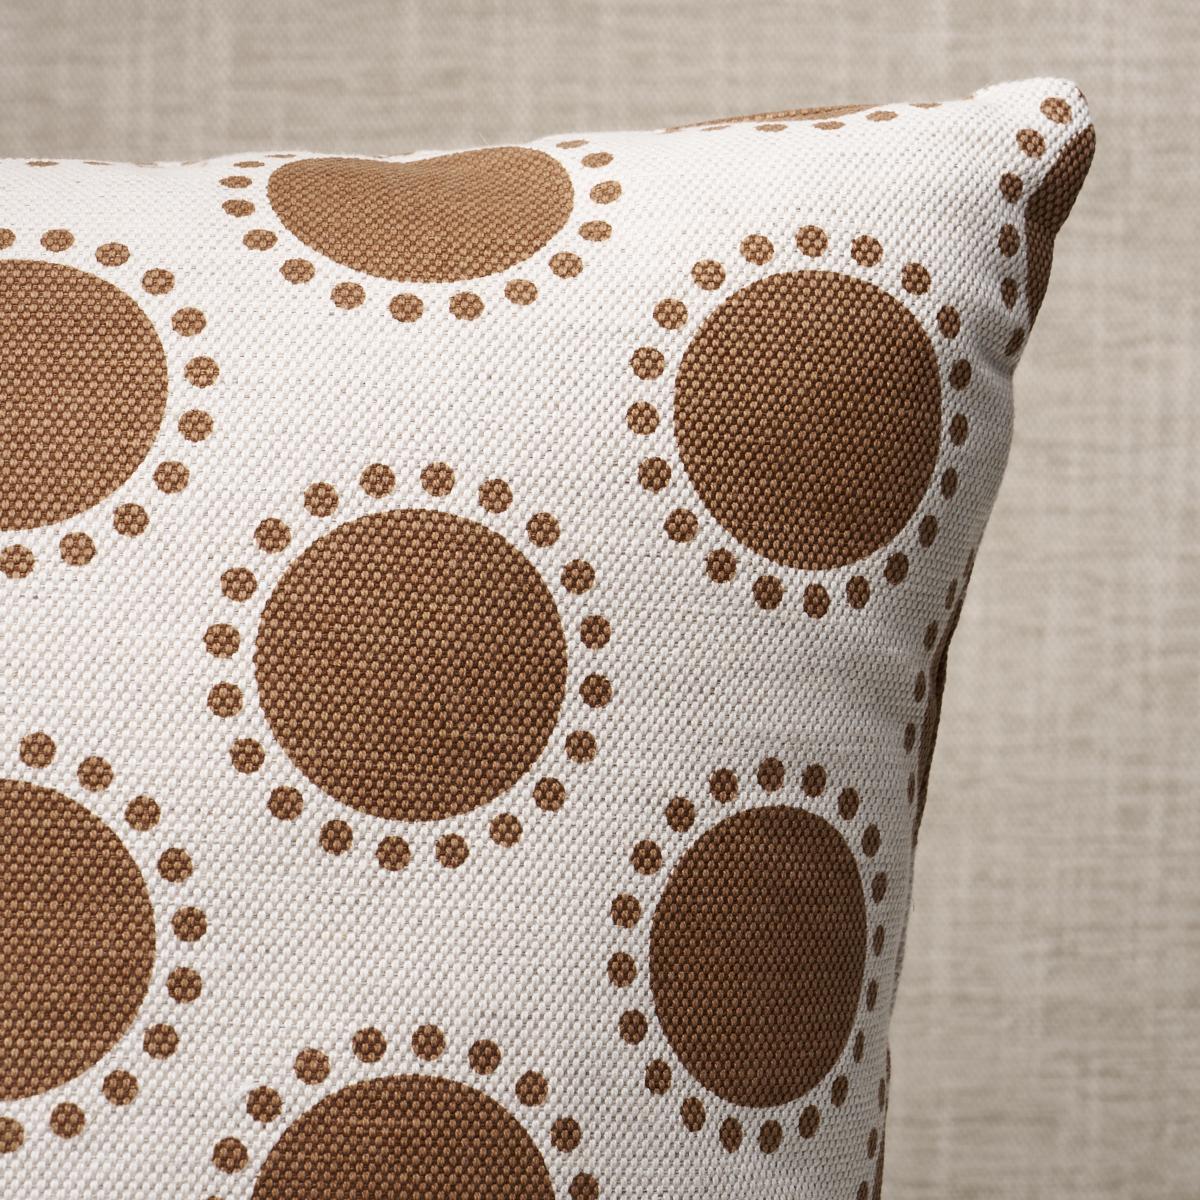 This pillow features Oompa by Studio Bon with a knife edge finish. With graphic offset polka dots encircled by diminutive dot details, Oompa is a playful, modern design by Studio Bon. Pillow includes a feather/down fill insert and hidden zipper